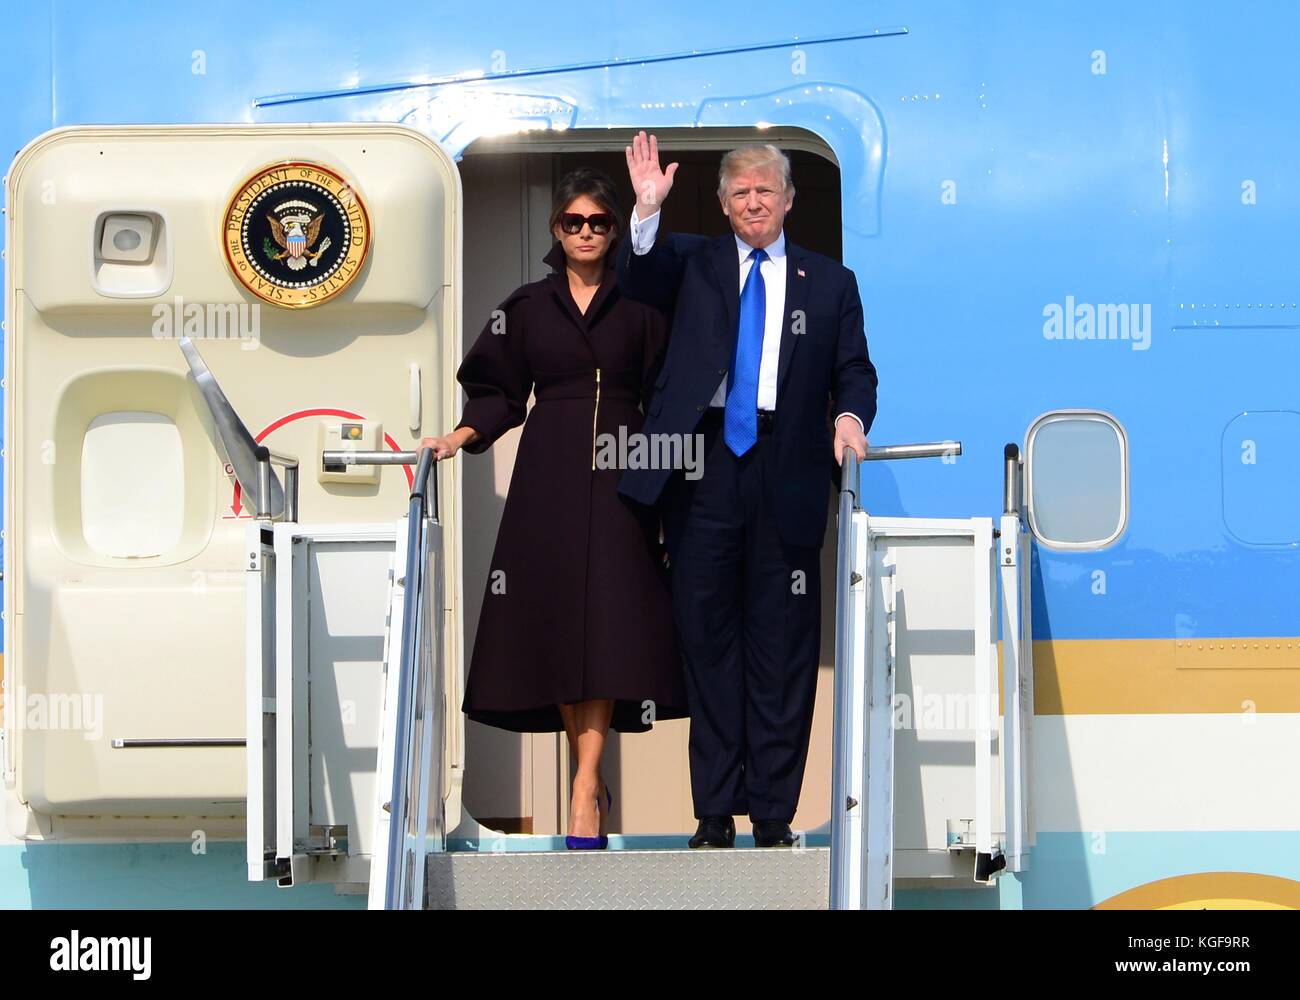 Osan, South Korea. 07th Nov, 2017. U.S President Donald Trump waves as he and First Lady Melania Trump step off Air Force One after landing at Osan Air Base November 7, 2017 in Osan, South Korea. Trump landed in South Korea on the second stop of a 13-day swing through Asia. Credit: Planetpix/Alamy Live News Stock Photo